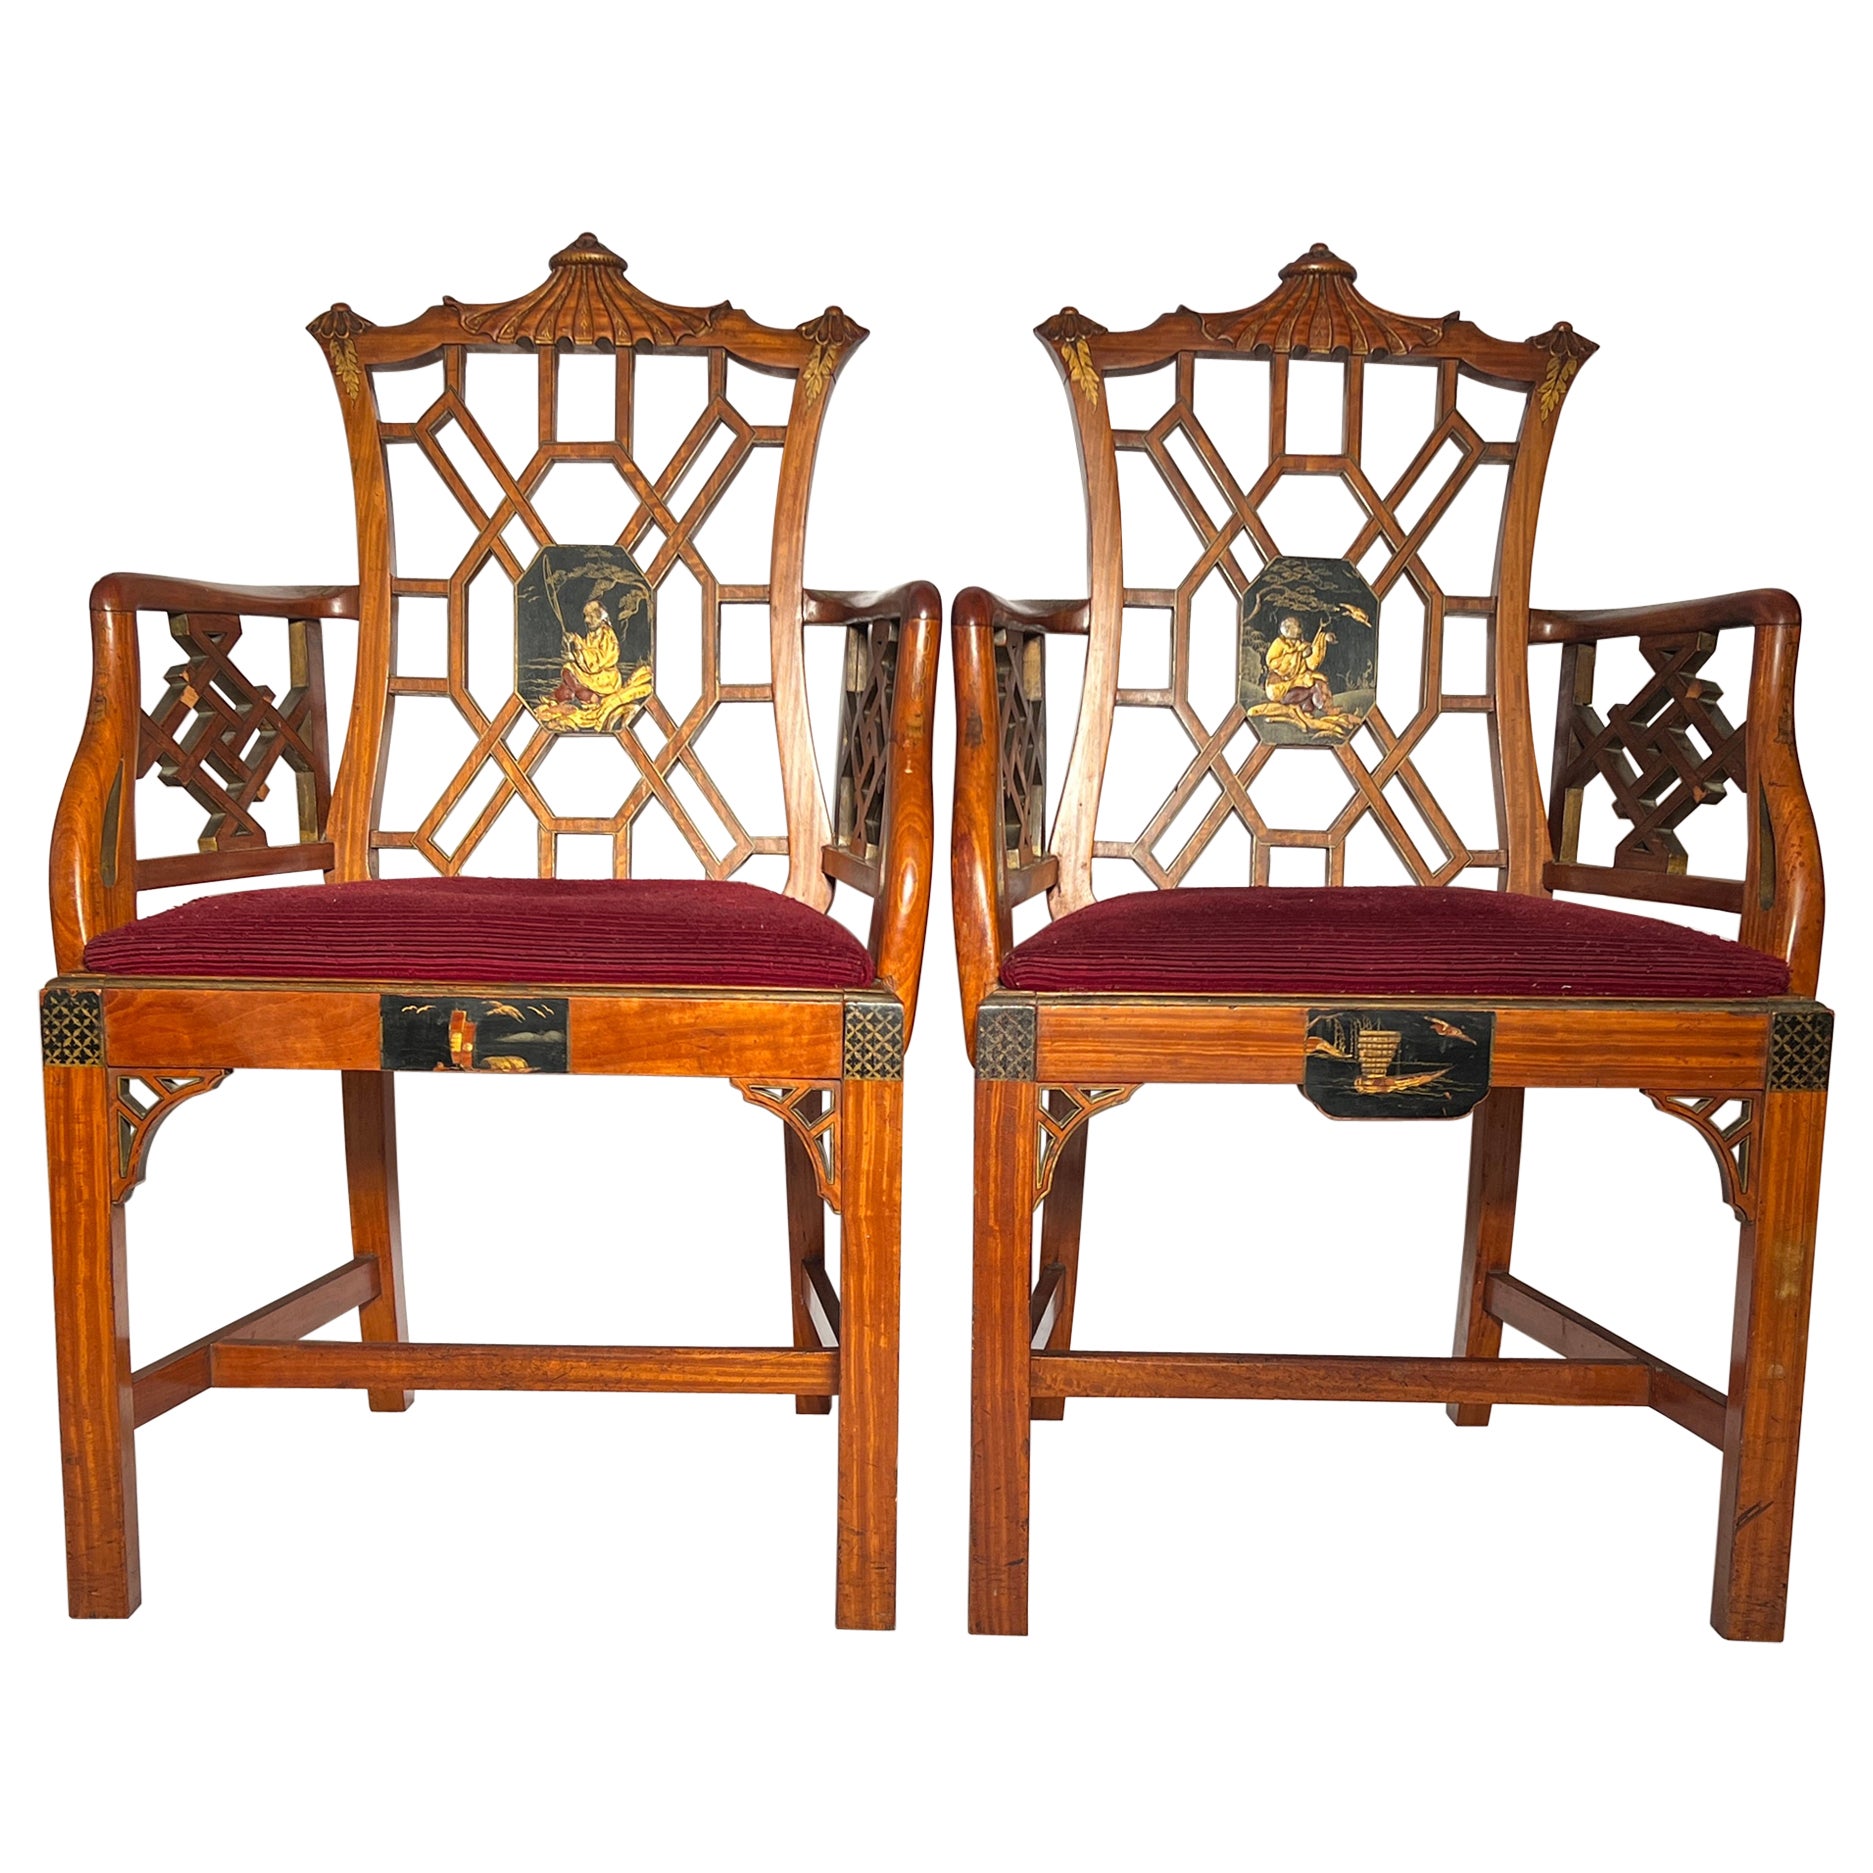 Antique Satinwood Chippendale Arm Chairs circa 1880